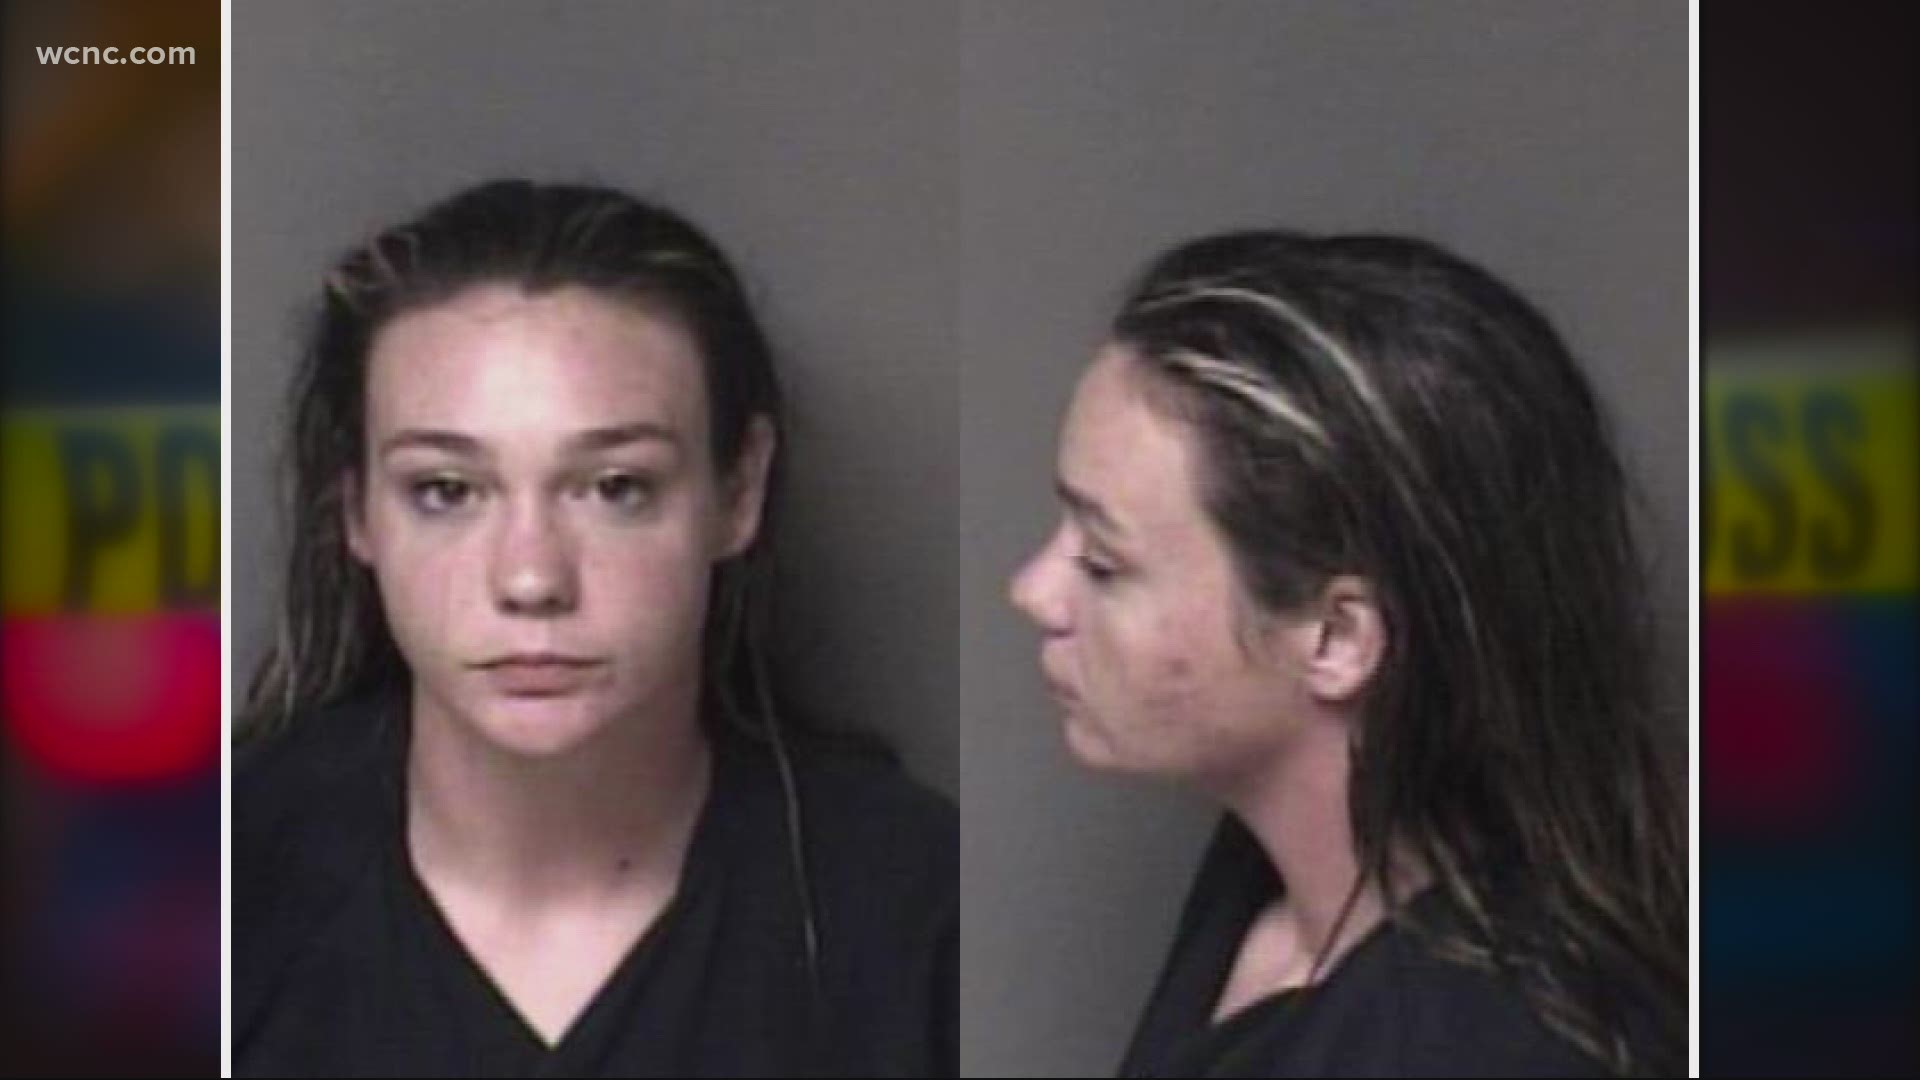 A woman is facing charges after a street race led to the death of a child.